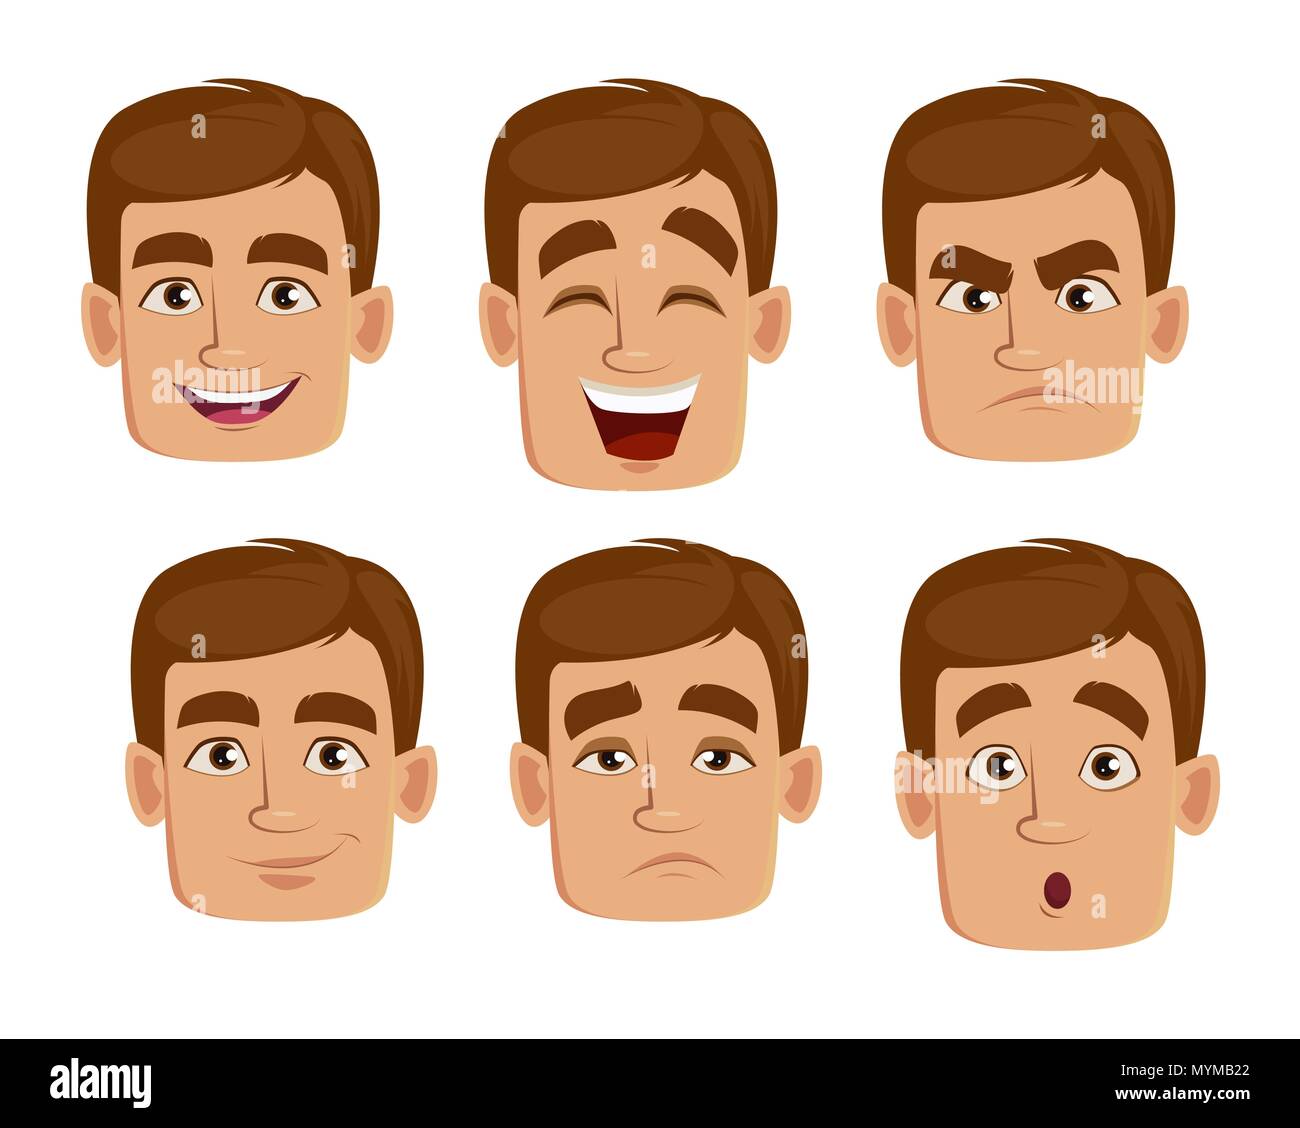 face expressions of man with brown hair. different male